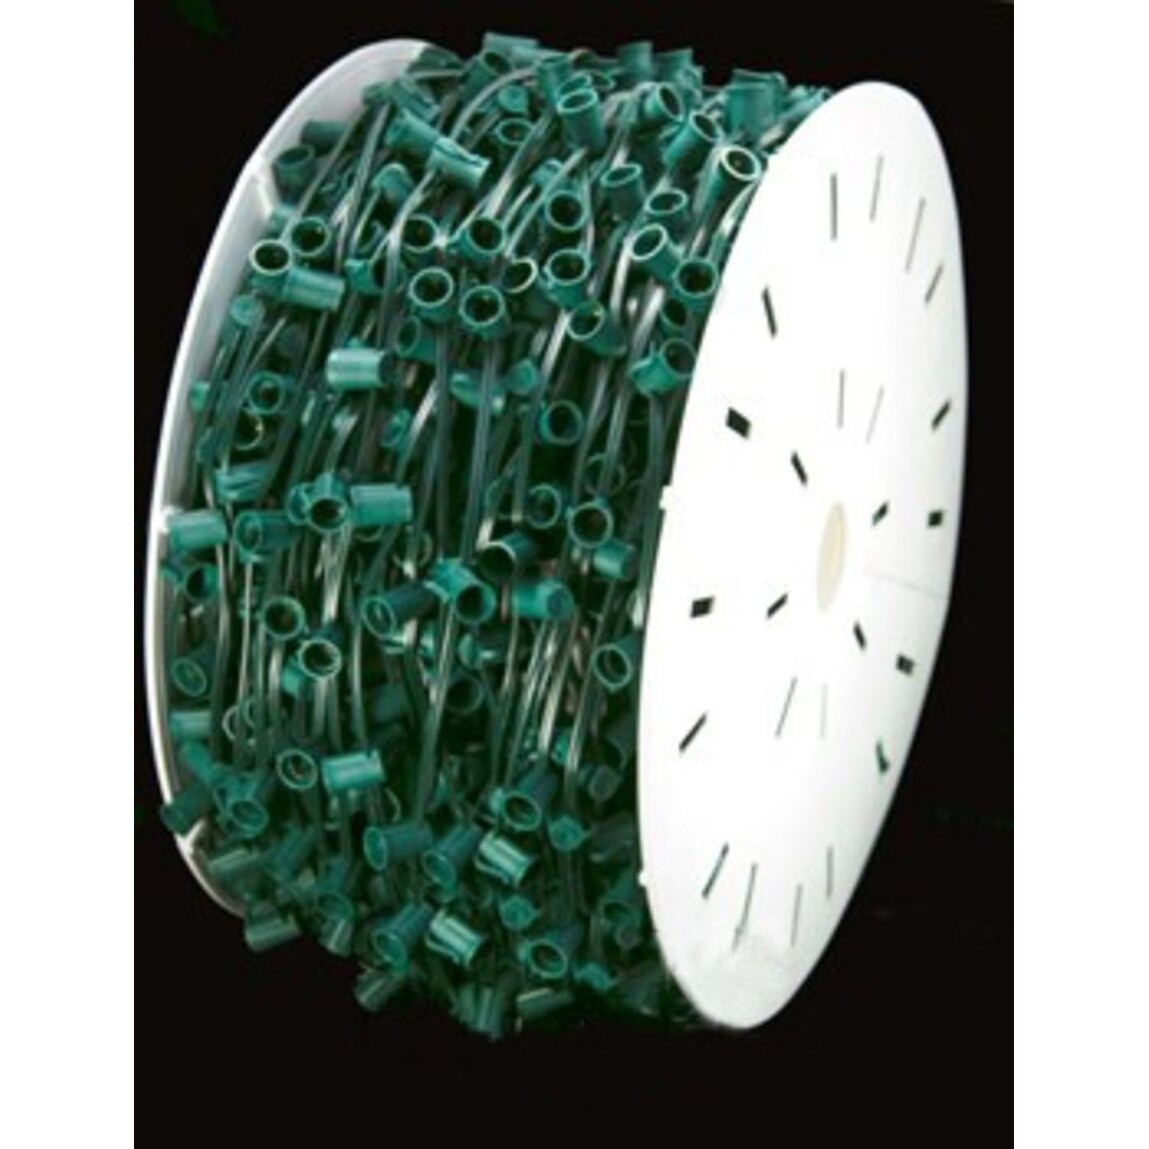 Vickerman 1000' C7 Socket String with 1000 C7 Sockets on SPT1 18 Gauge Green Wire - image 2 of 2